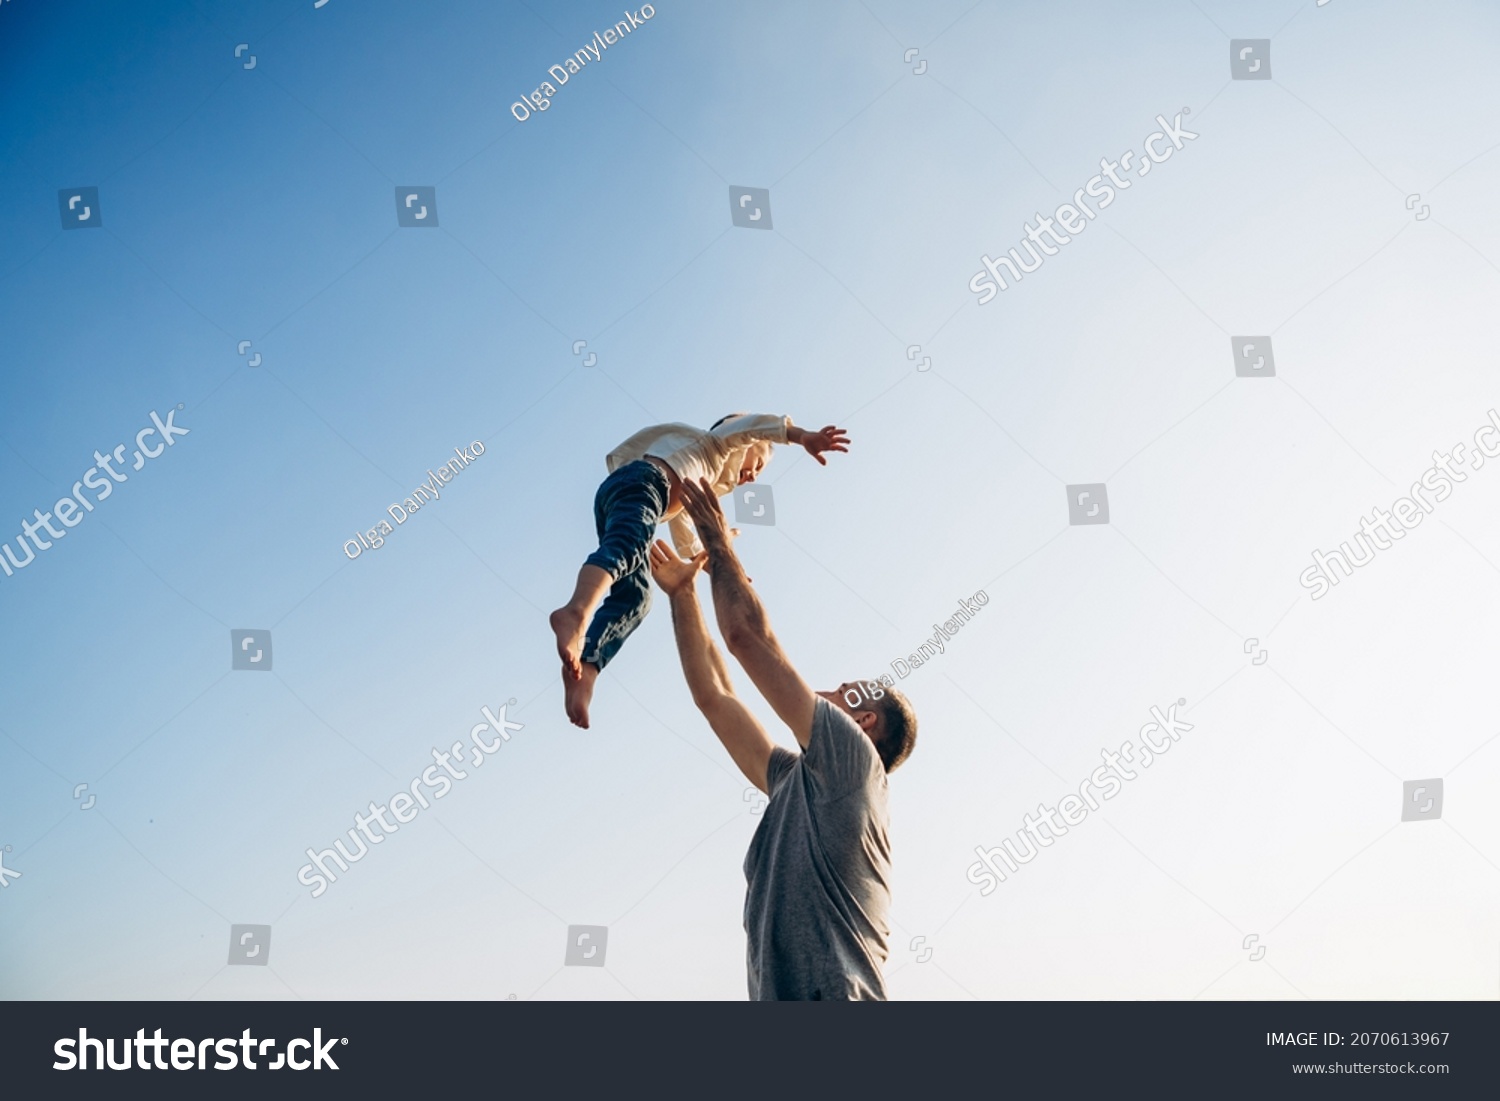 Father and son playing in the park at the sunset time. Family, trust, protecting, care, parenting, summer vacation concept #2070613967